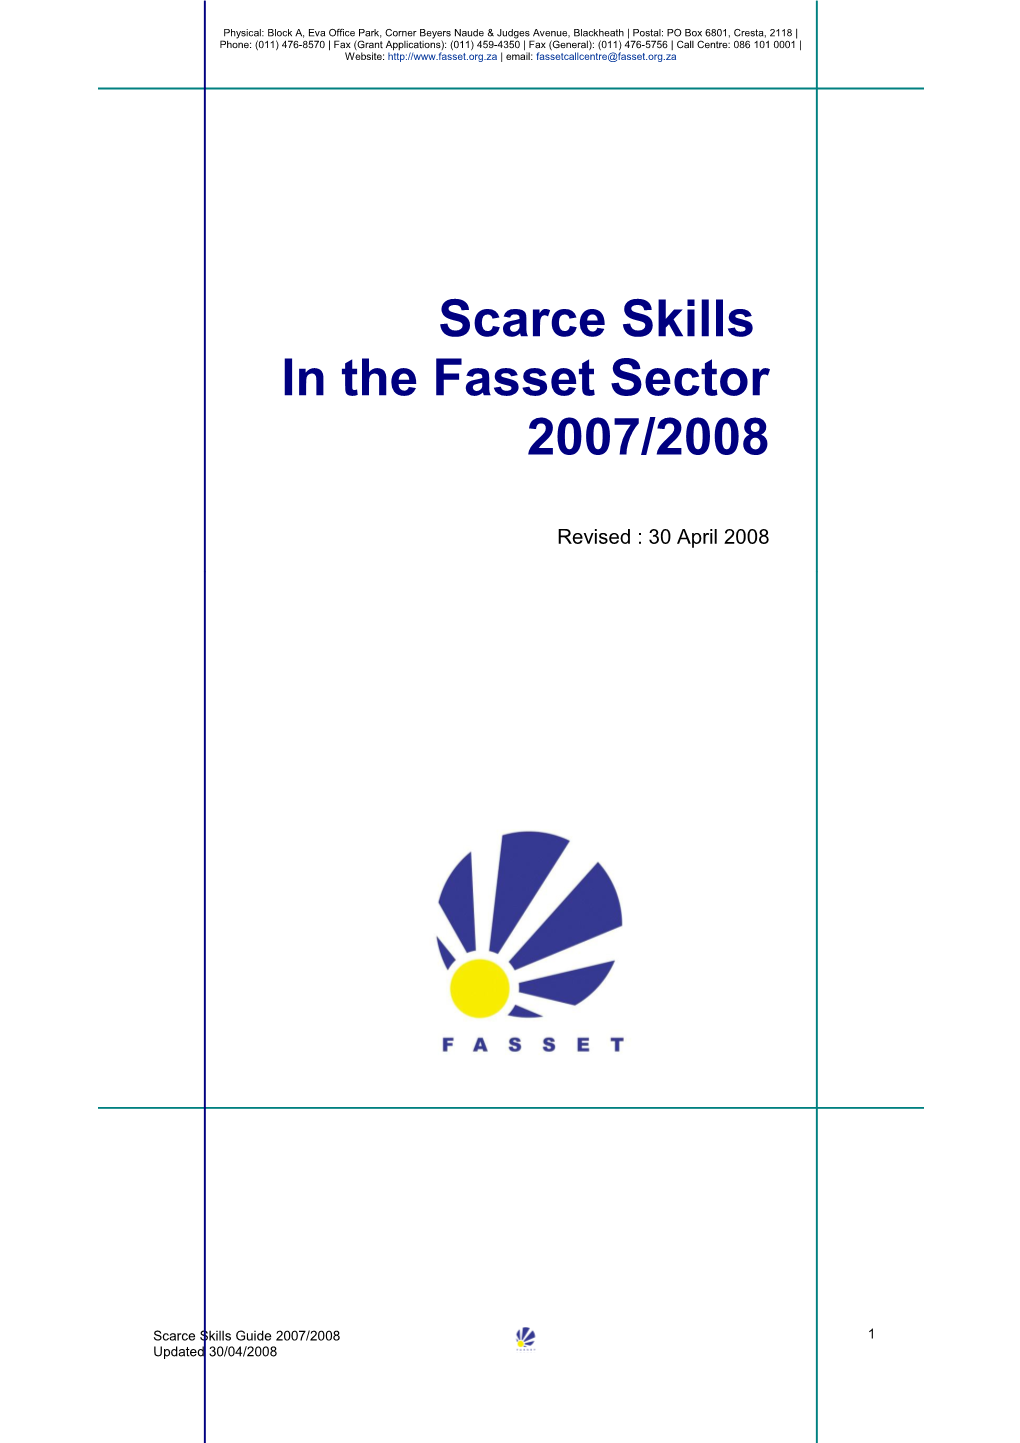 It Is the Third Year of the Publication of the Fasset Scarce Skills Guide. 2006 Marked